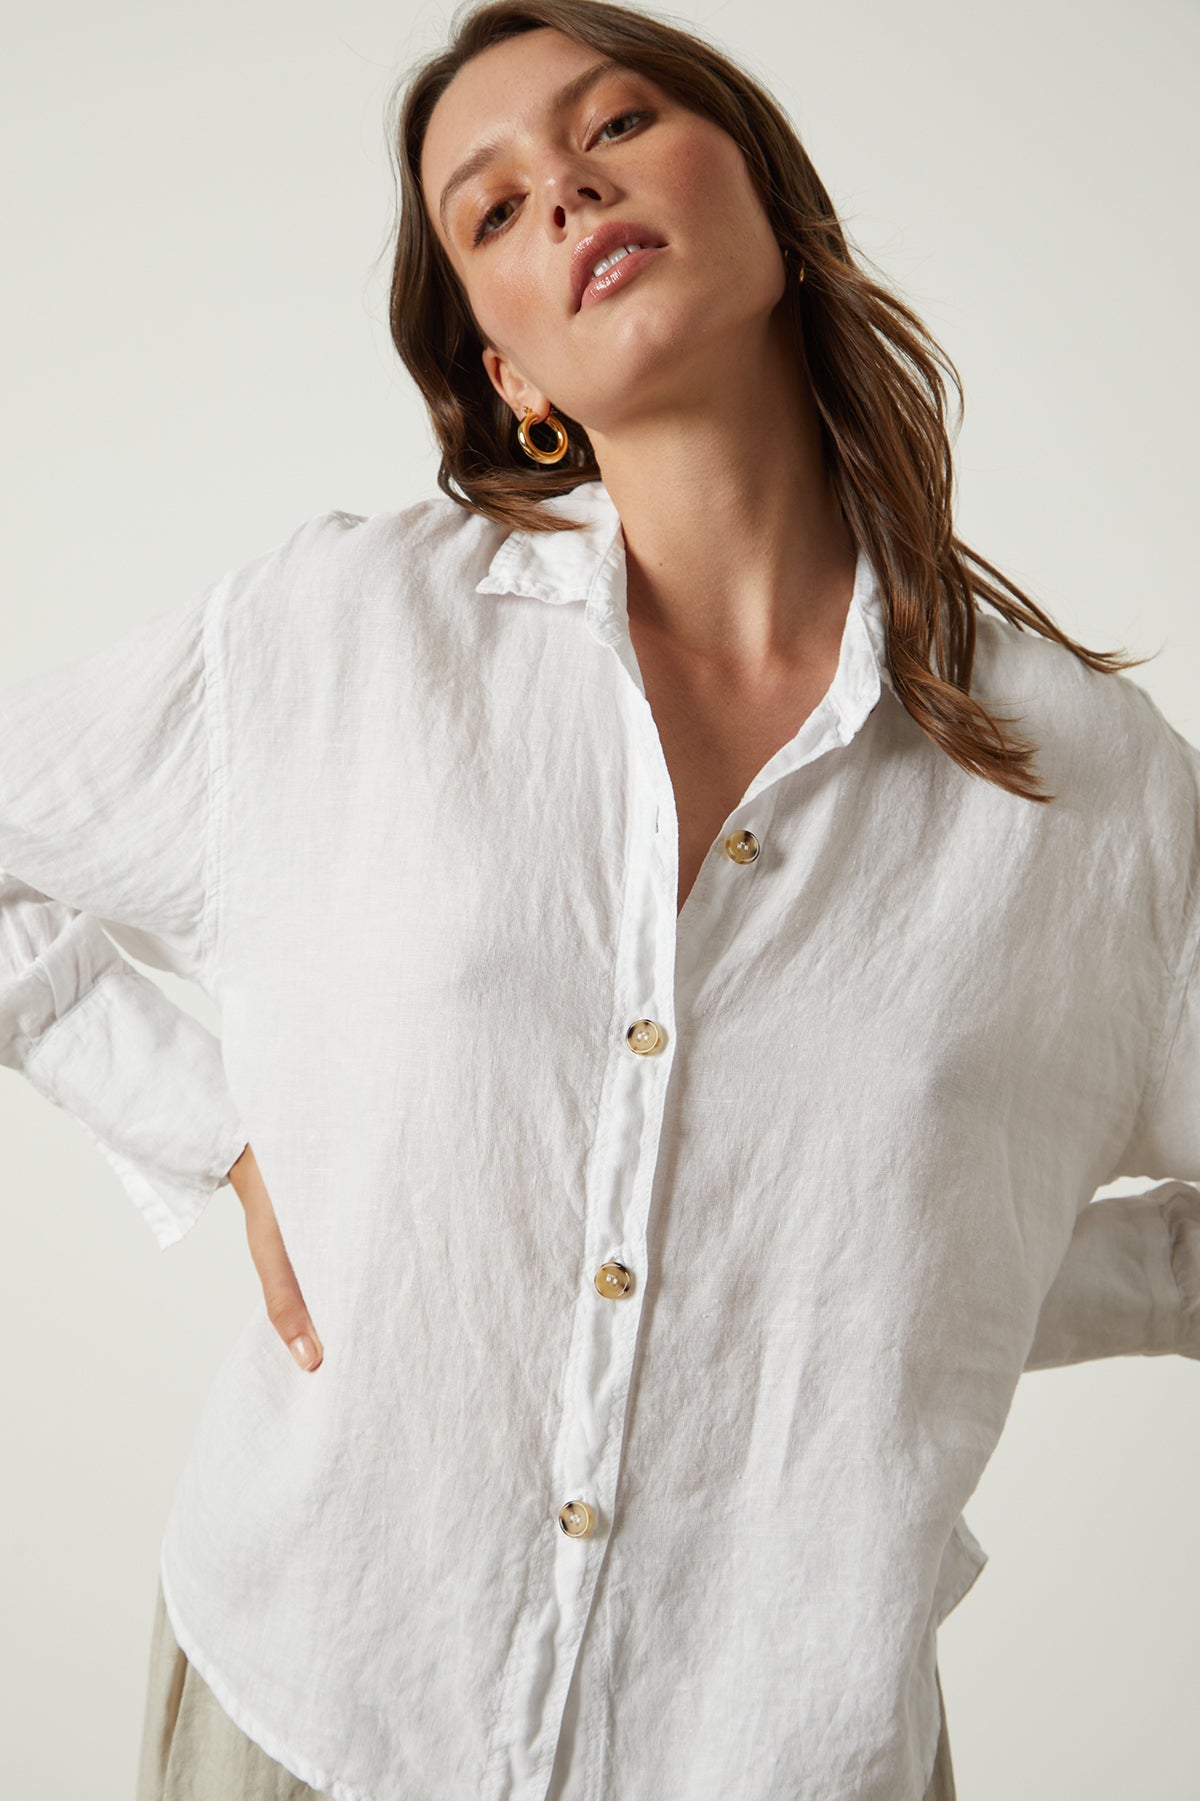 Eden button up shirt in white close up front-26087886815425